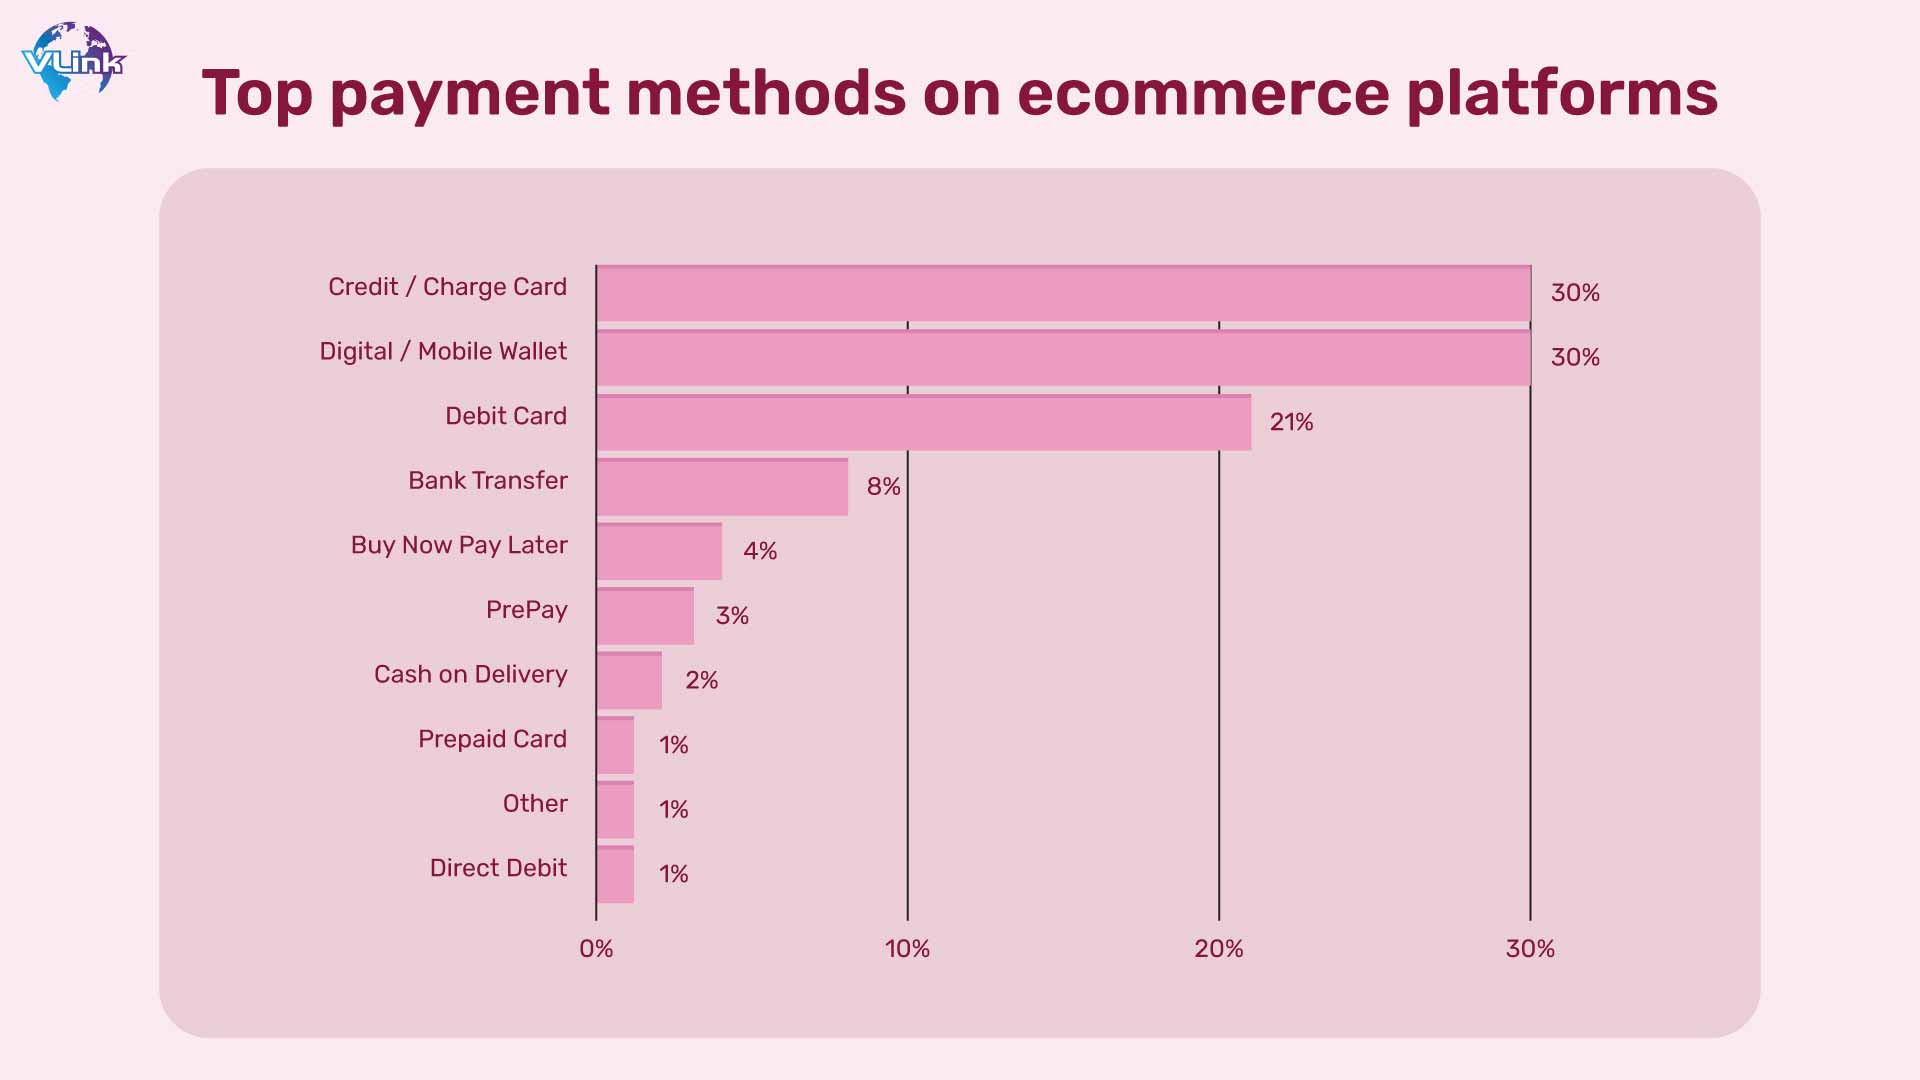 Top payment methods on ecommerce platforms